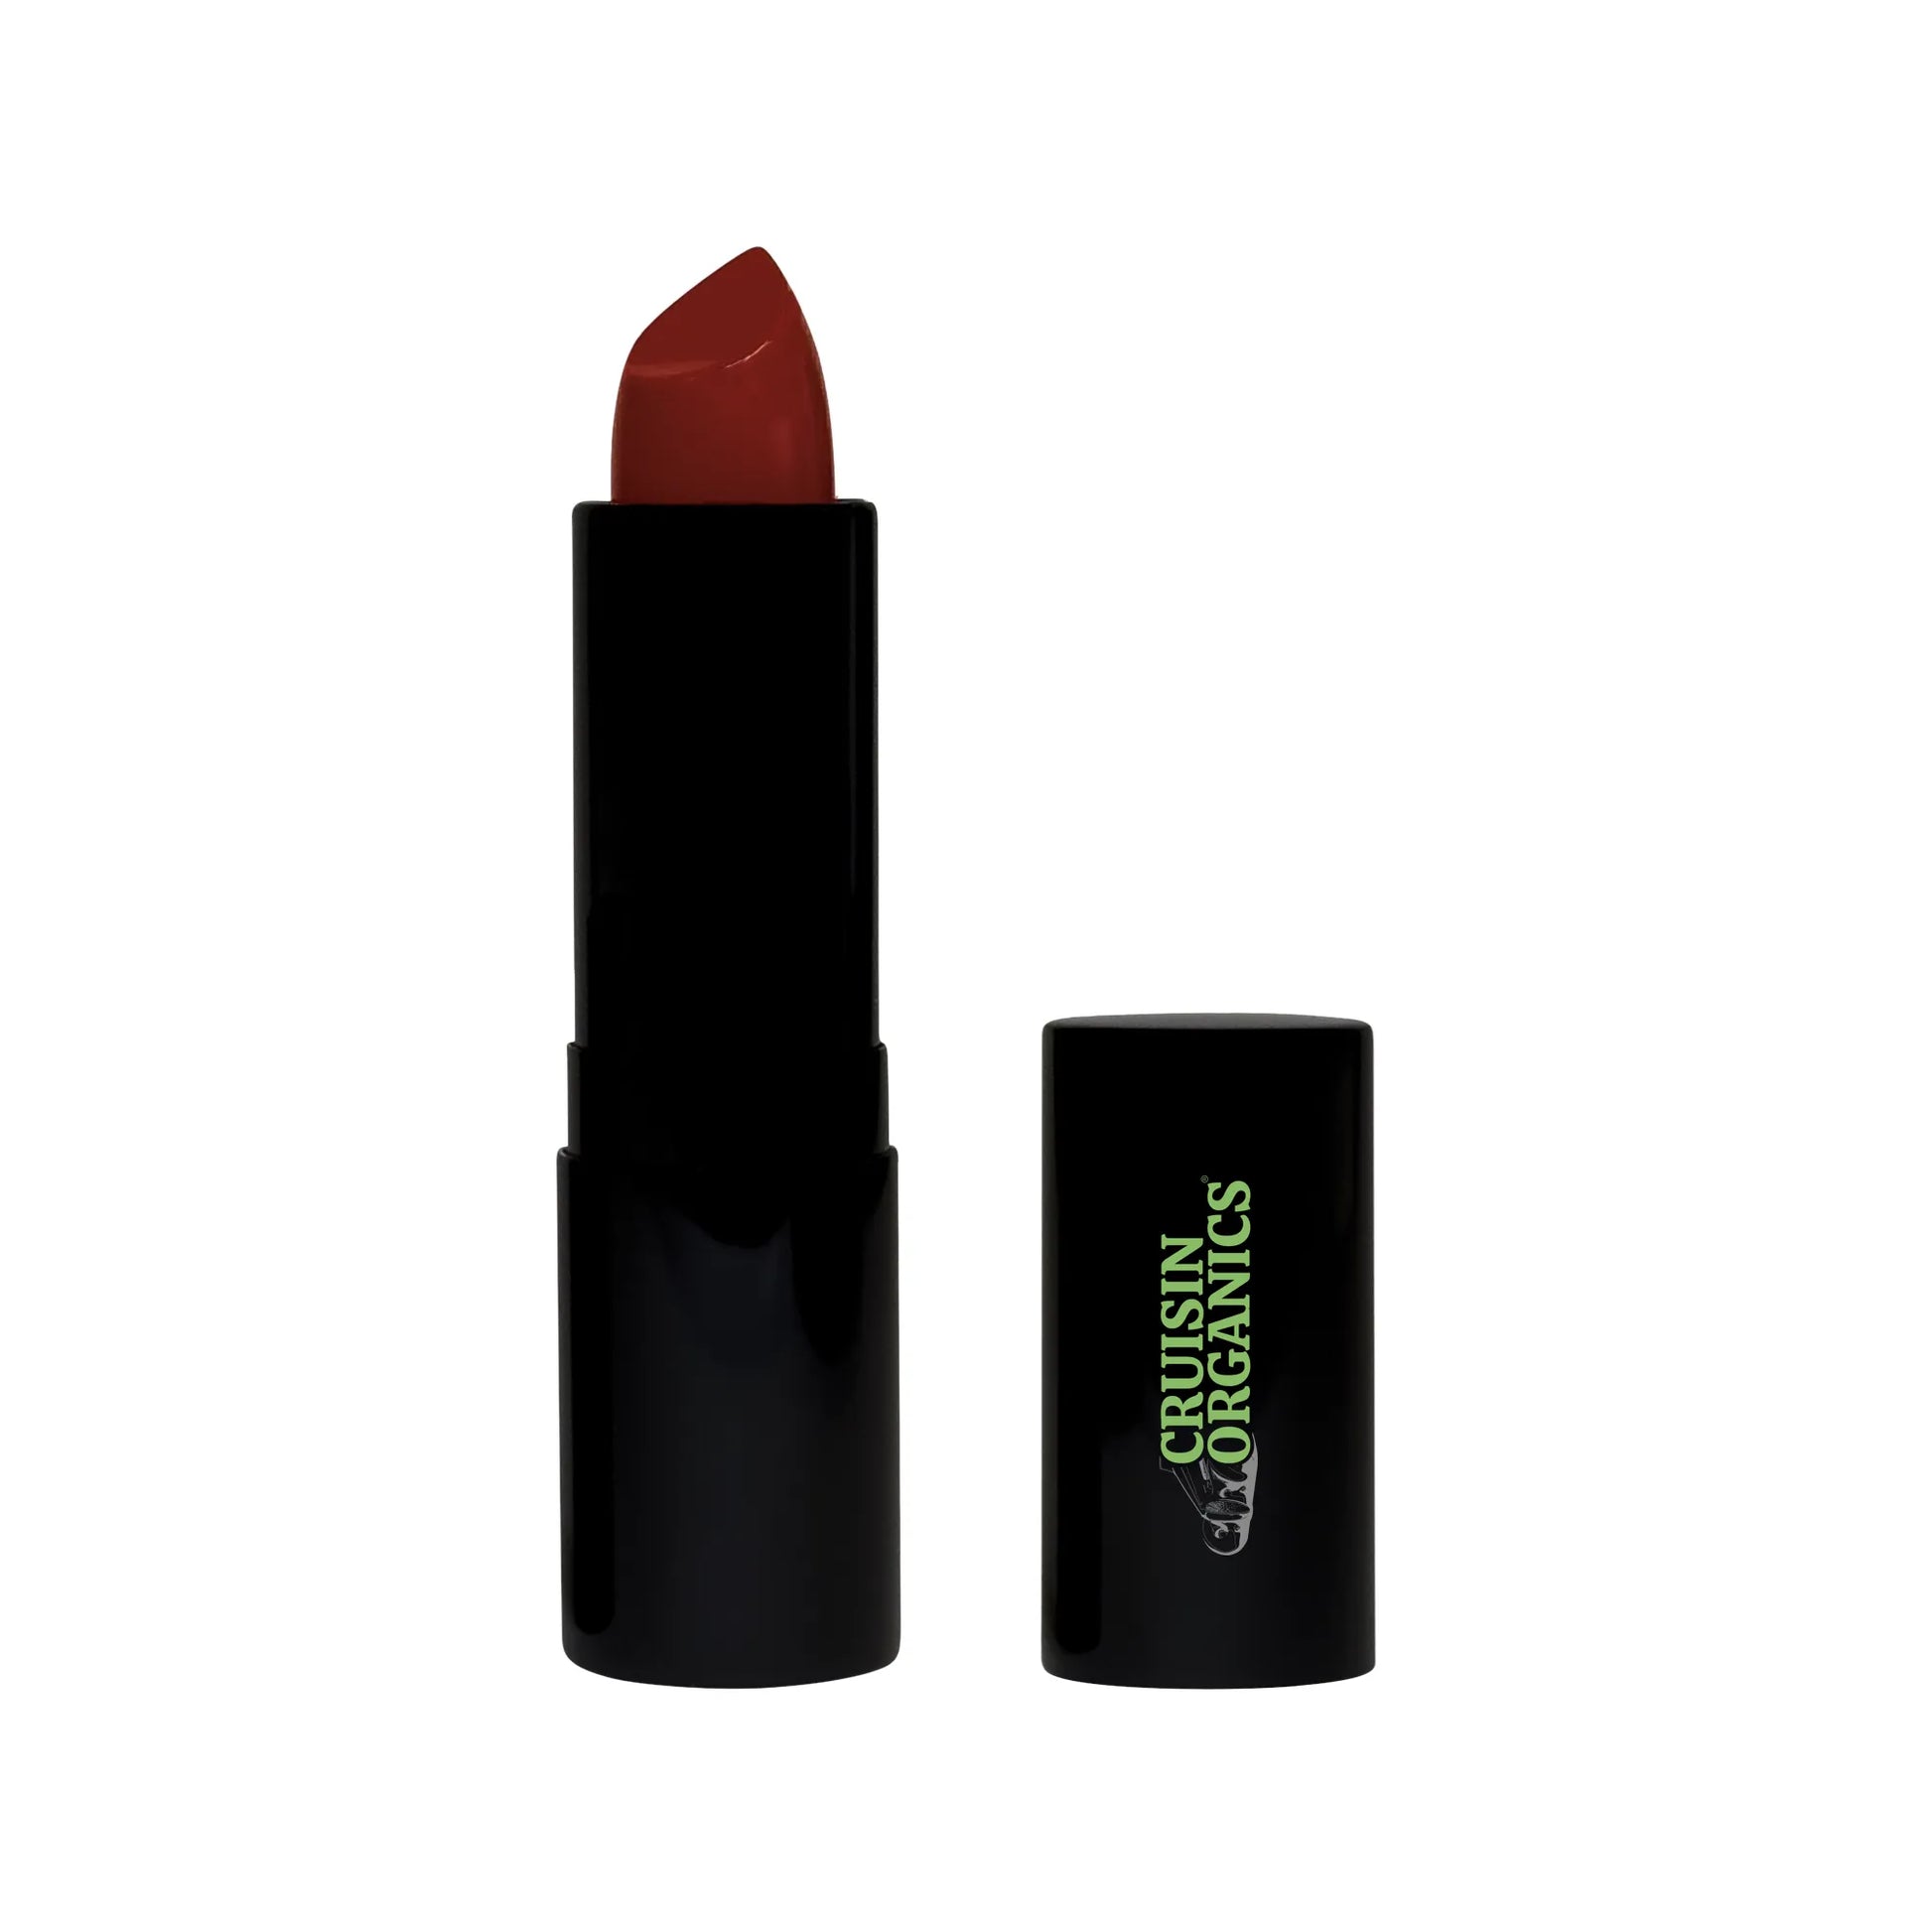 Buy Cruisin Organics Red Carpet Red Matte Lipstick for yourself, sister, bro or bestie for life.